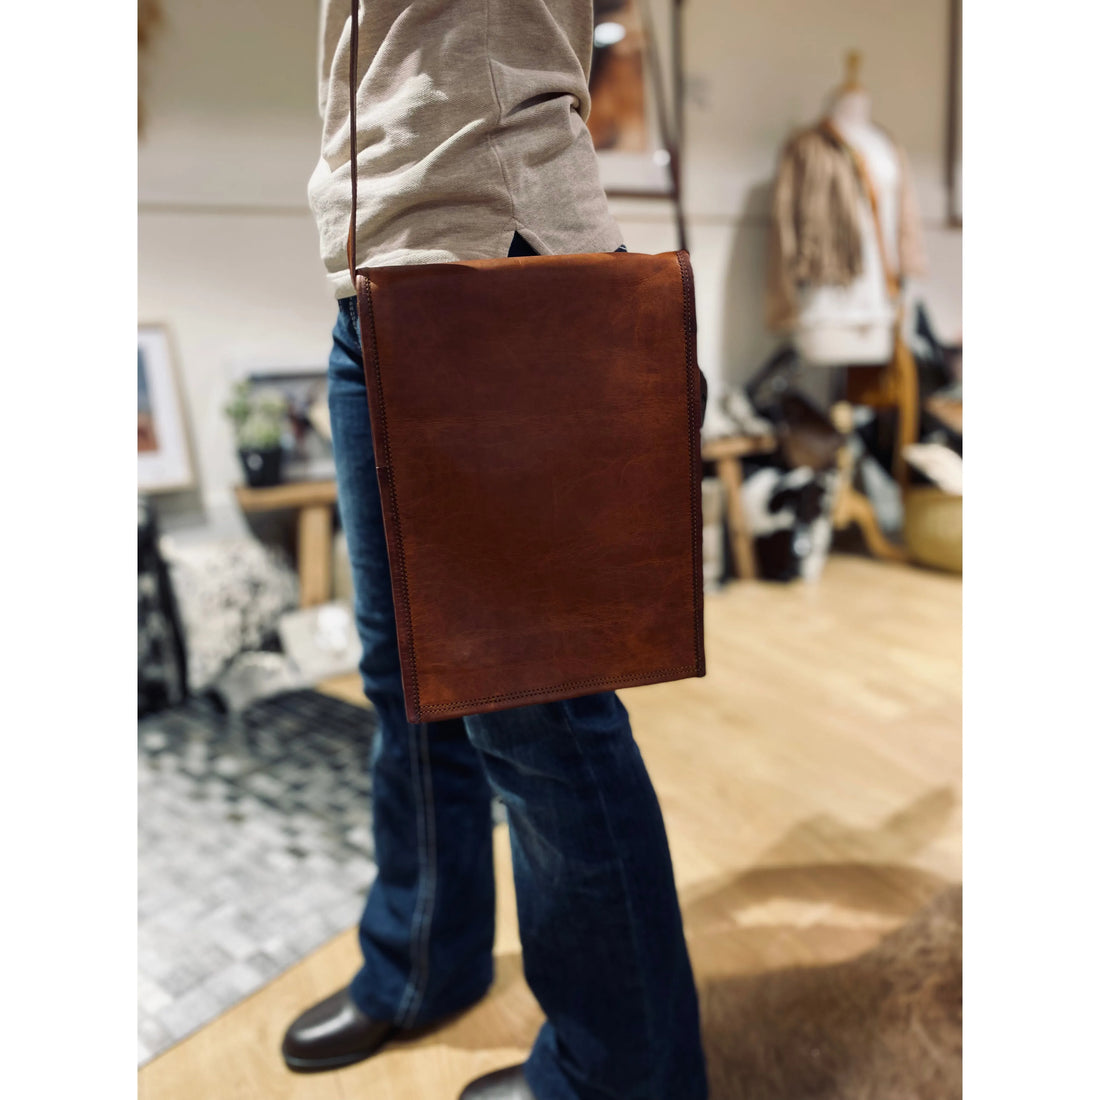 Tall Leather Satchel 11”